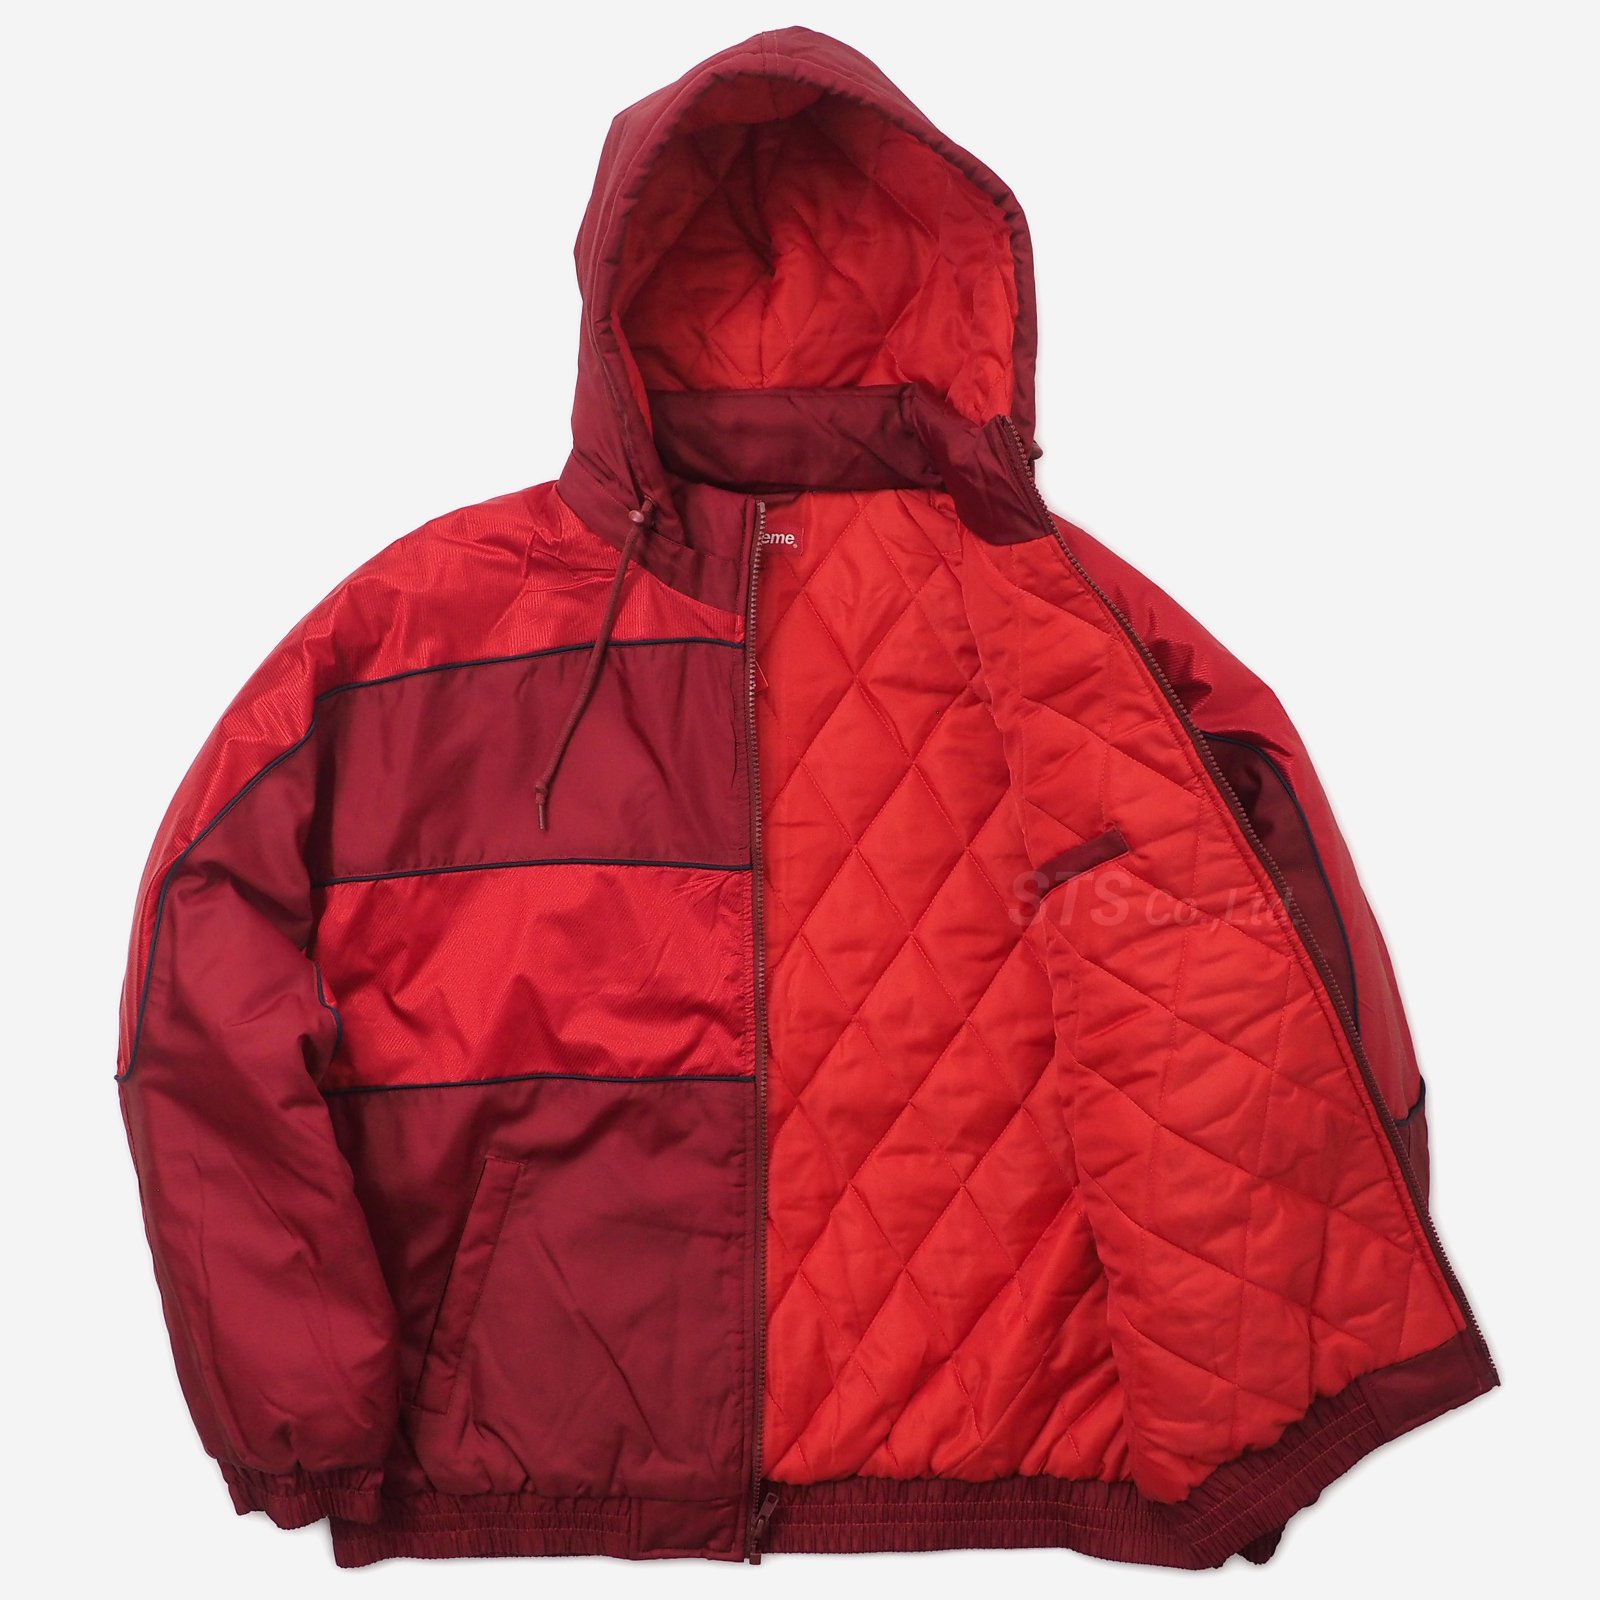 Supreme - Sports Piping Puffy Jacket - ParkSIDER